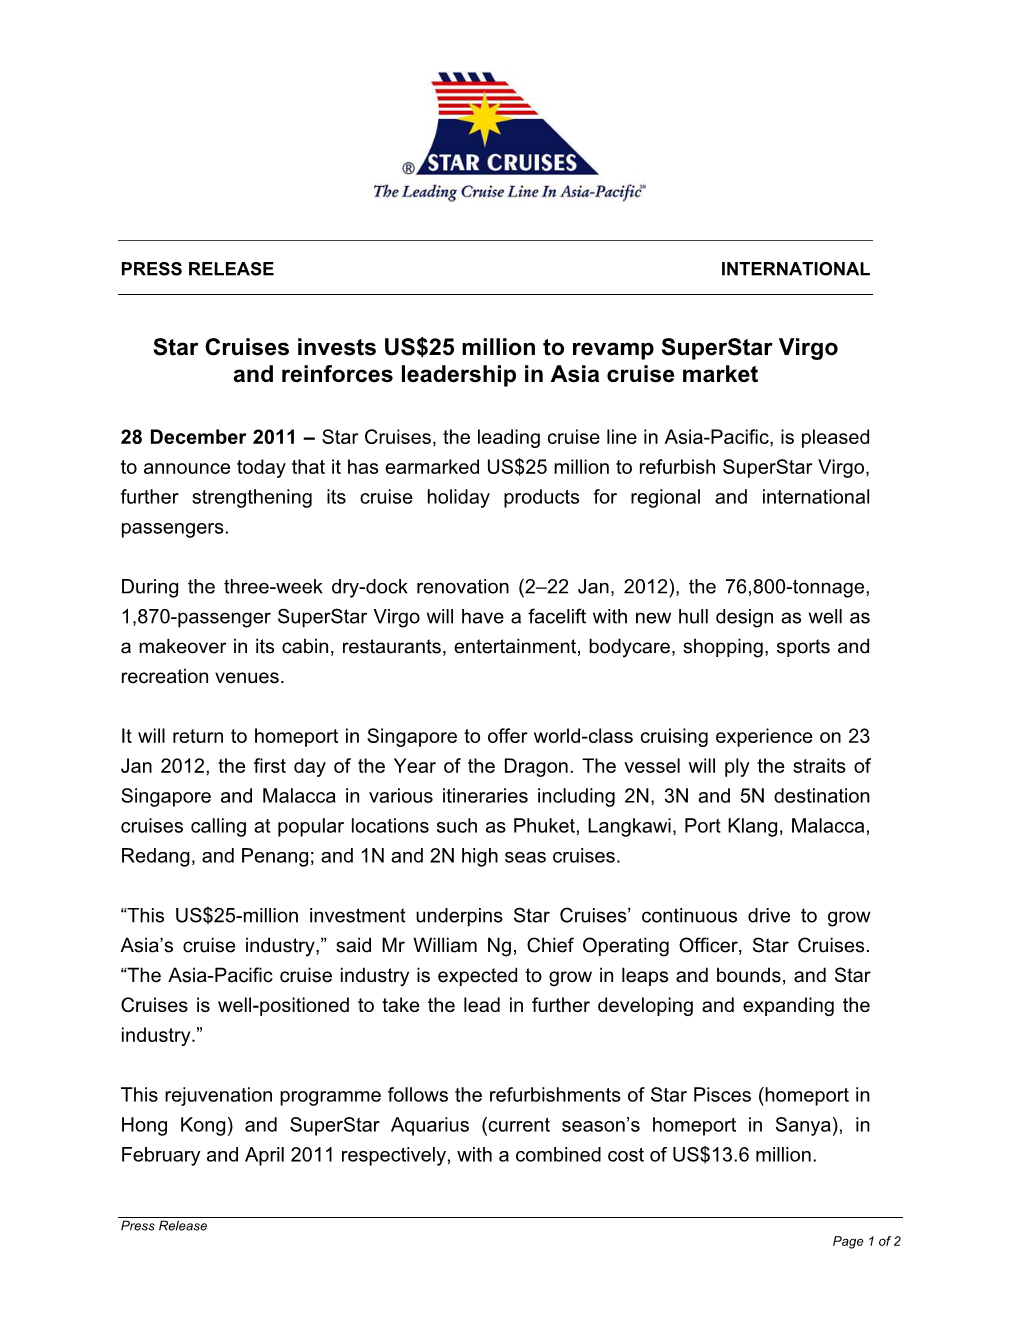 Star Cruises Invests US$25 Million to Revamp Superstar Virgo and Reinforces Leadership in Asia Cruise Market